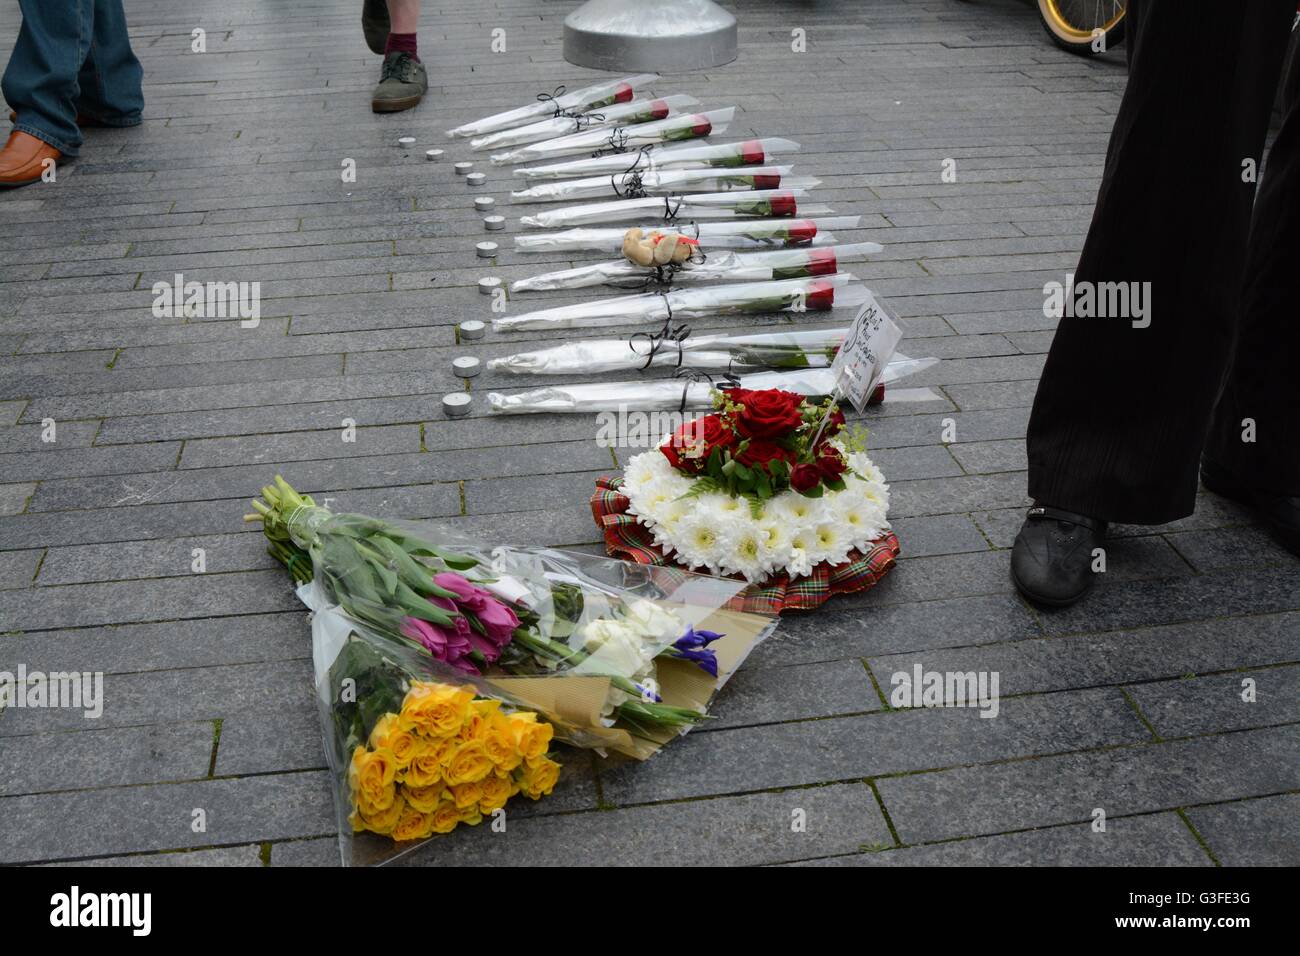 London, England. June 10th 2016. 11 candles and roses mark those who have died in recent weeks following collision with vehicles. Credit: Marc Ward/Alamy Live News Stock Photo